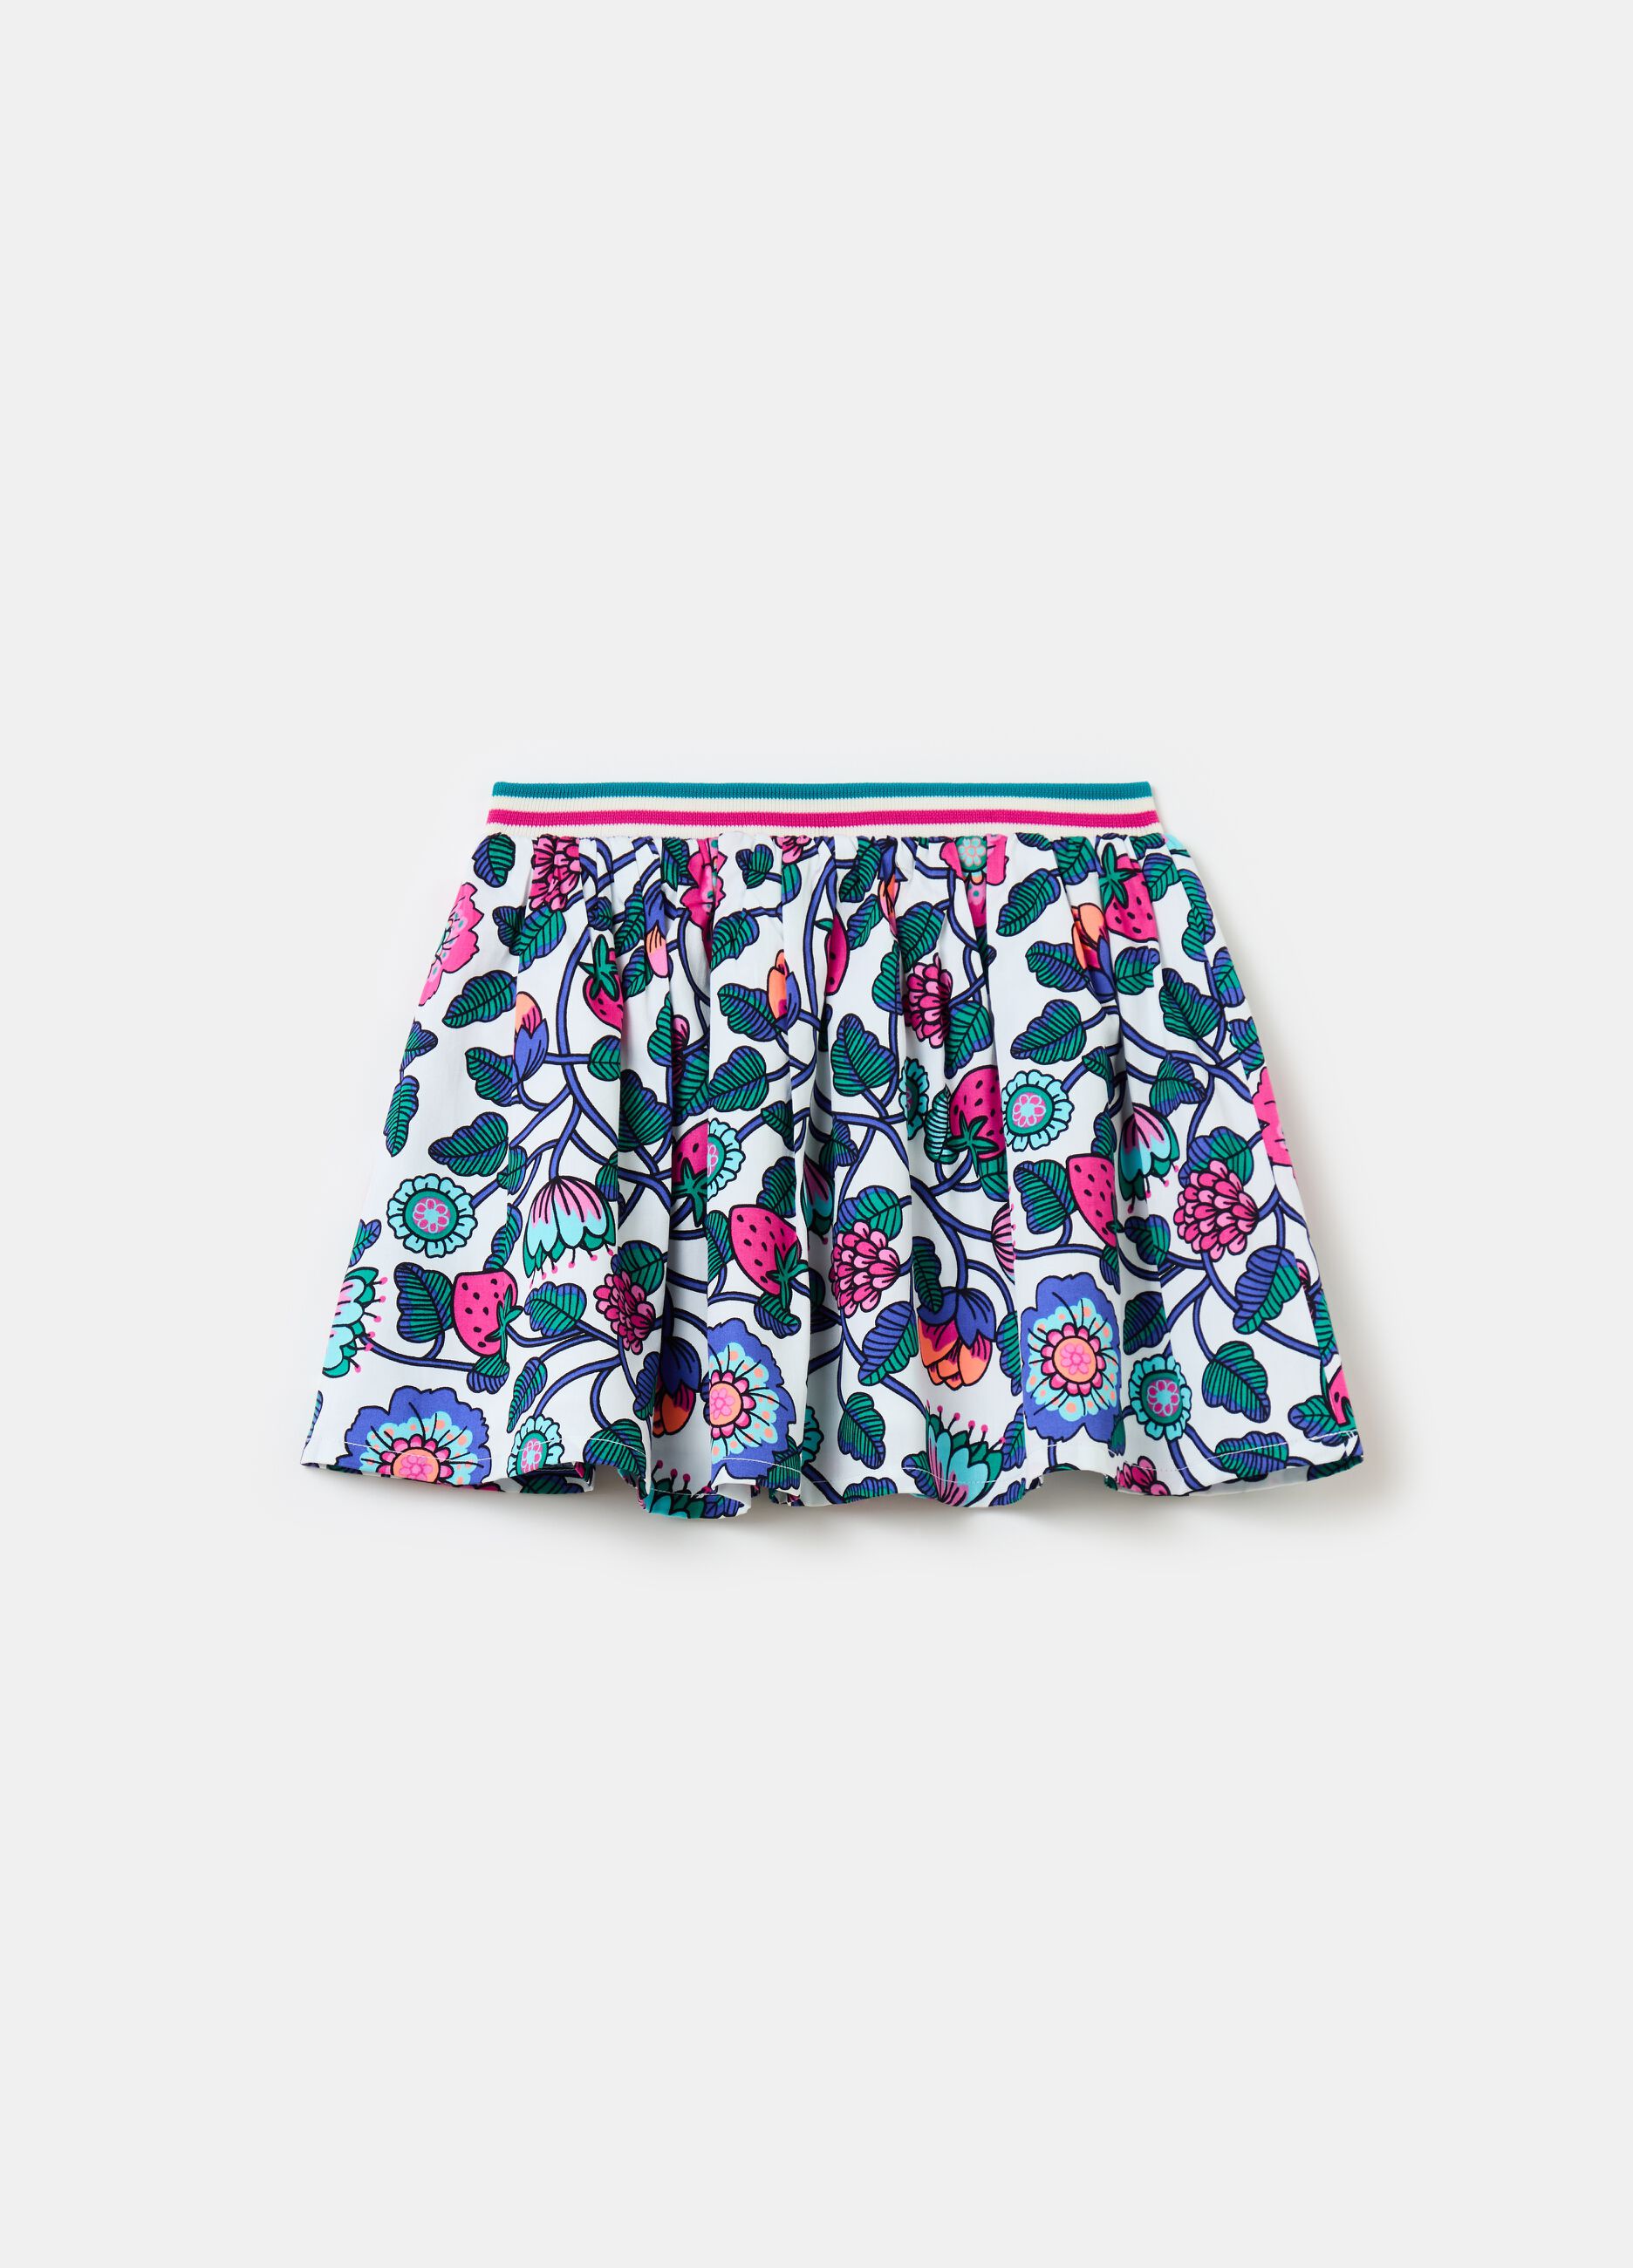 Cotton skirt with strawberries print